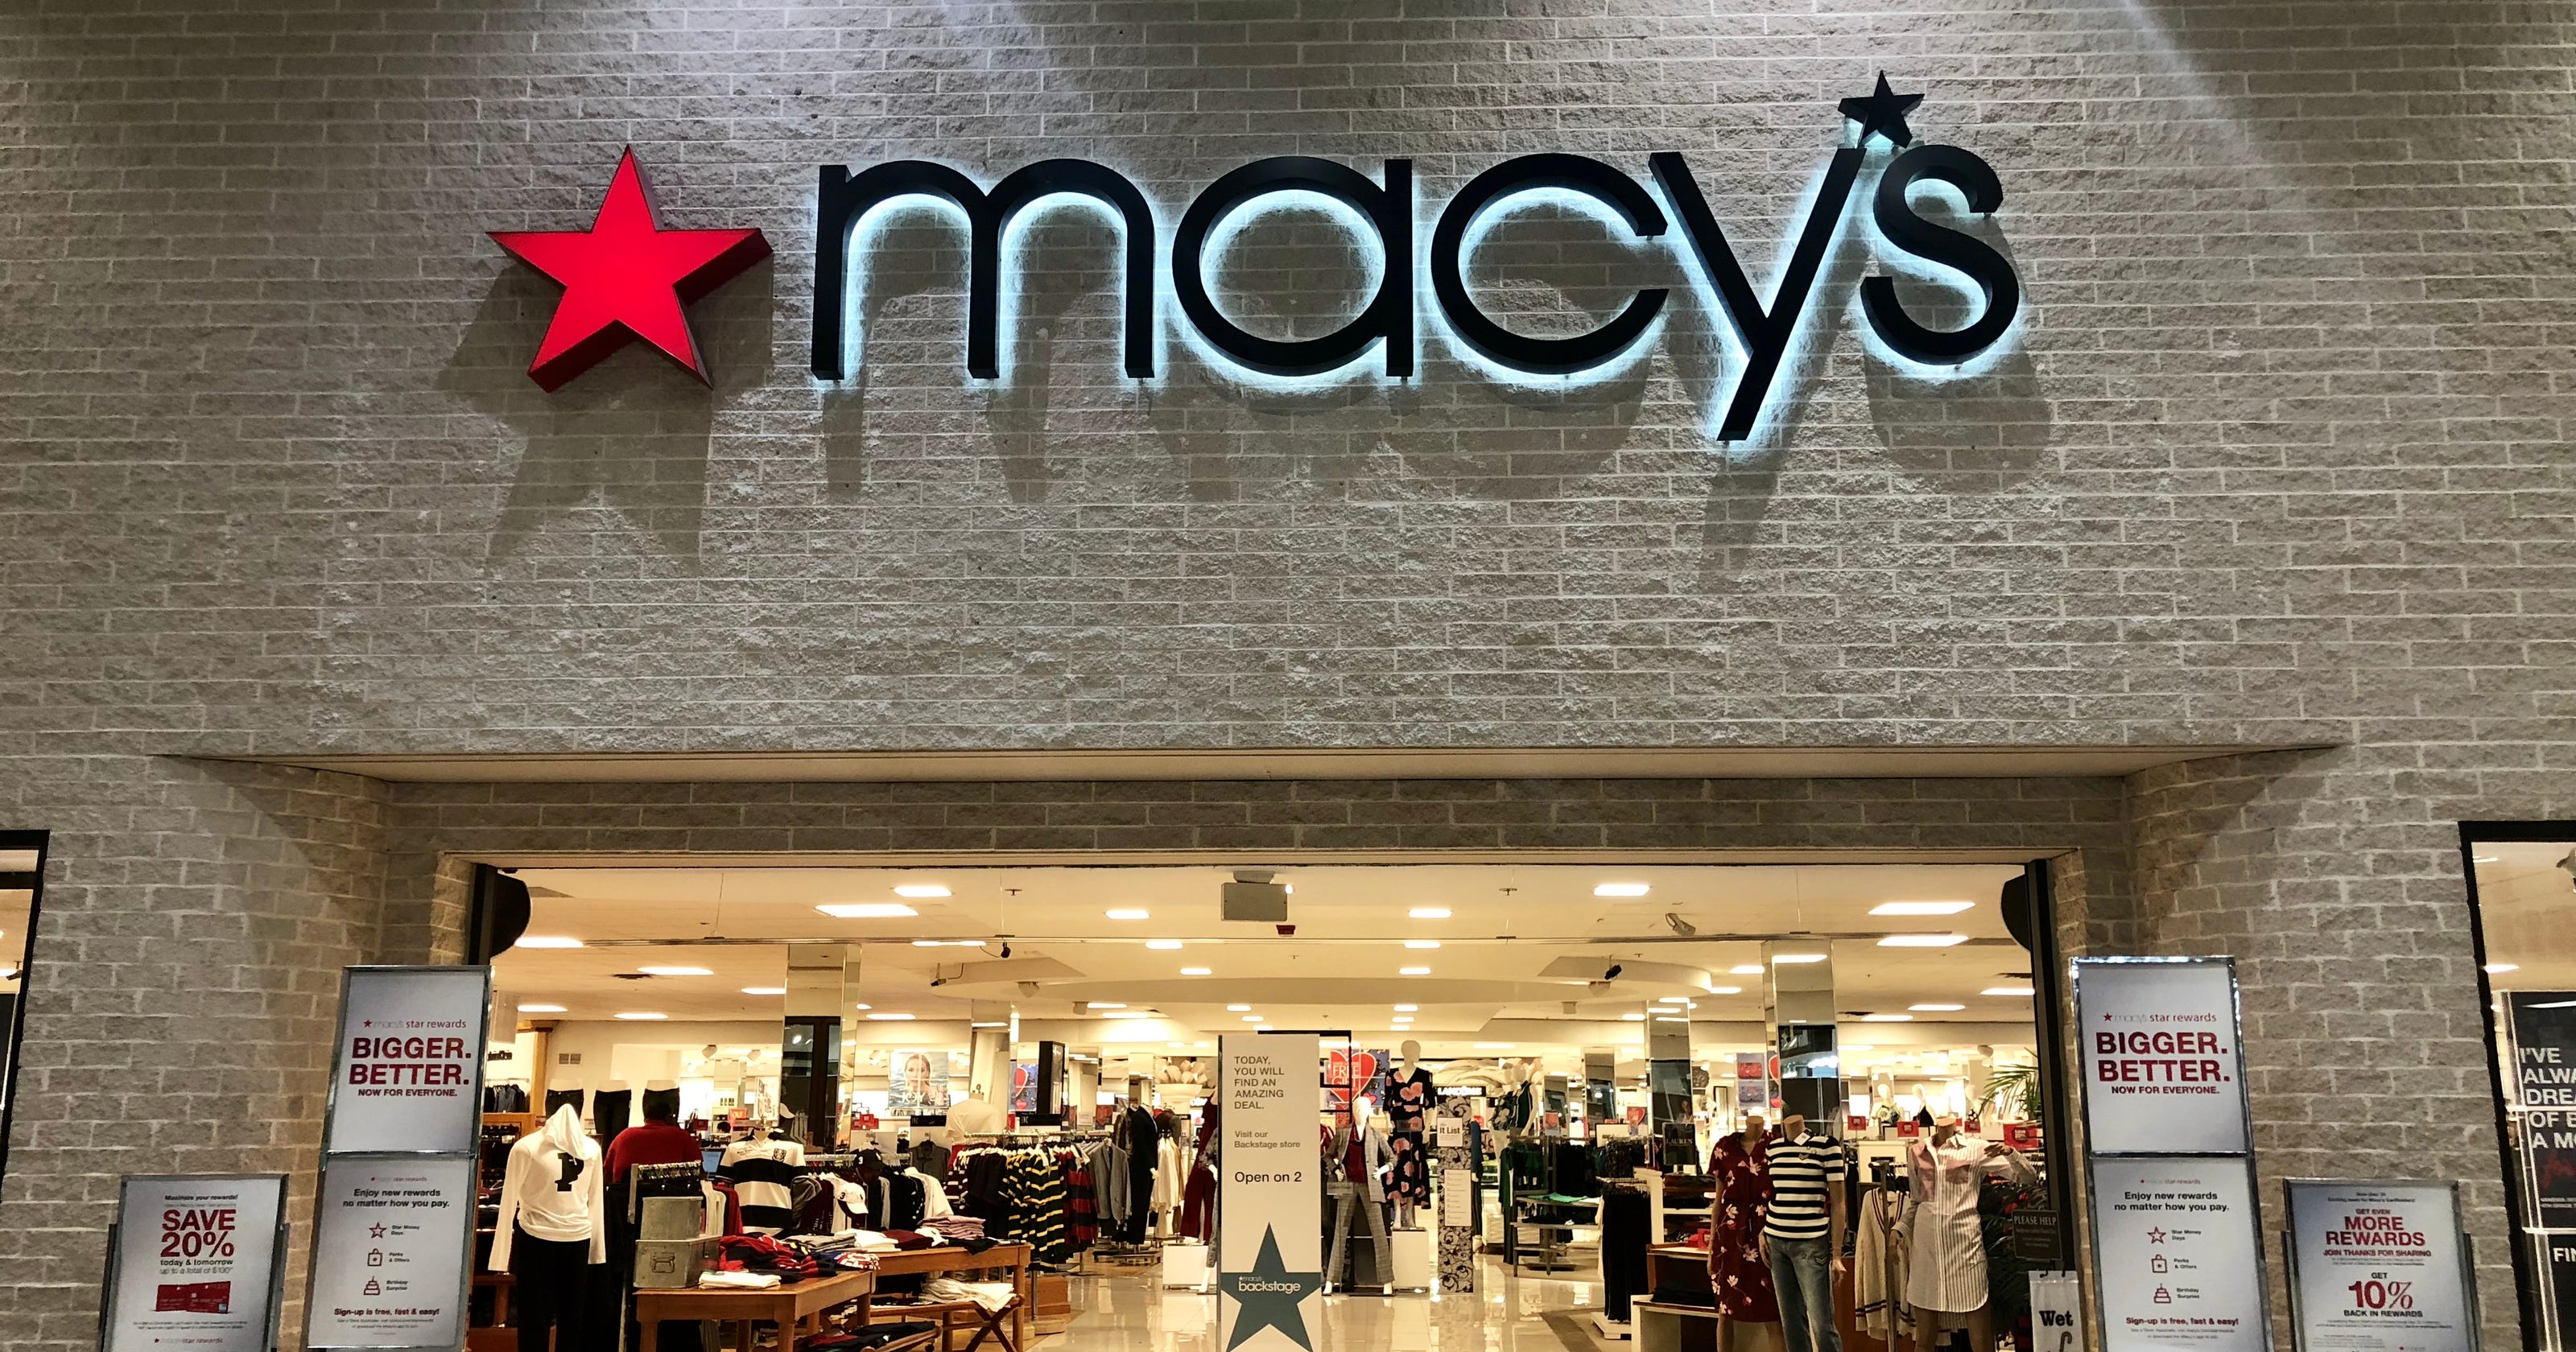 Black Friday 2018 Macy's sale starts on Thanksgiving with free items